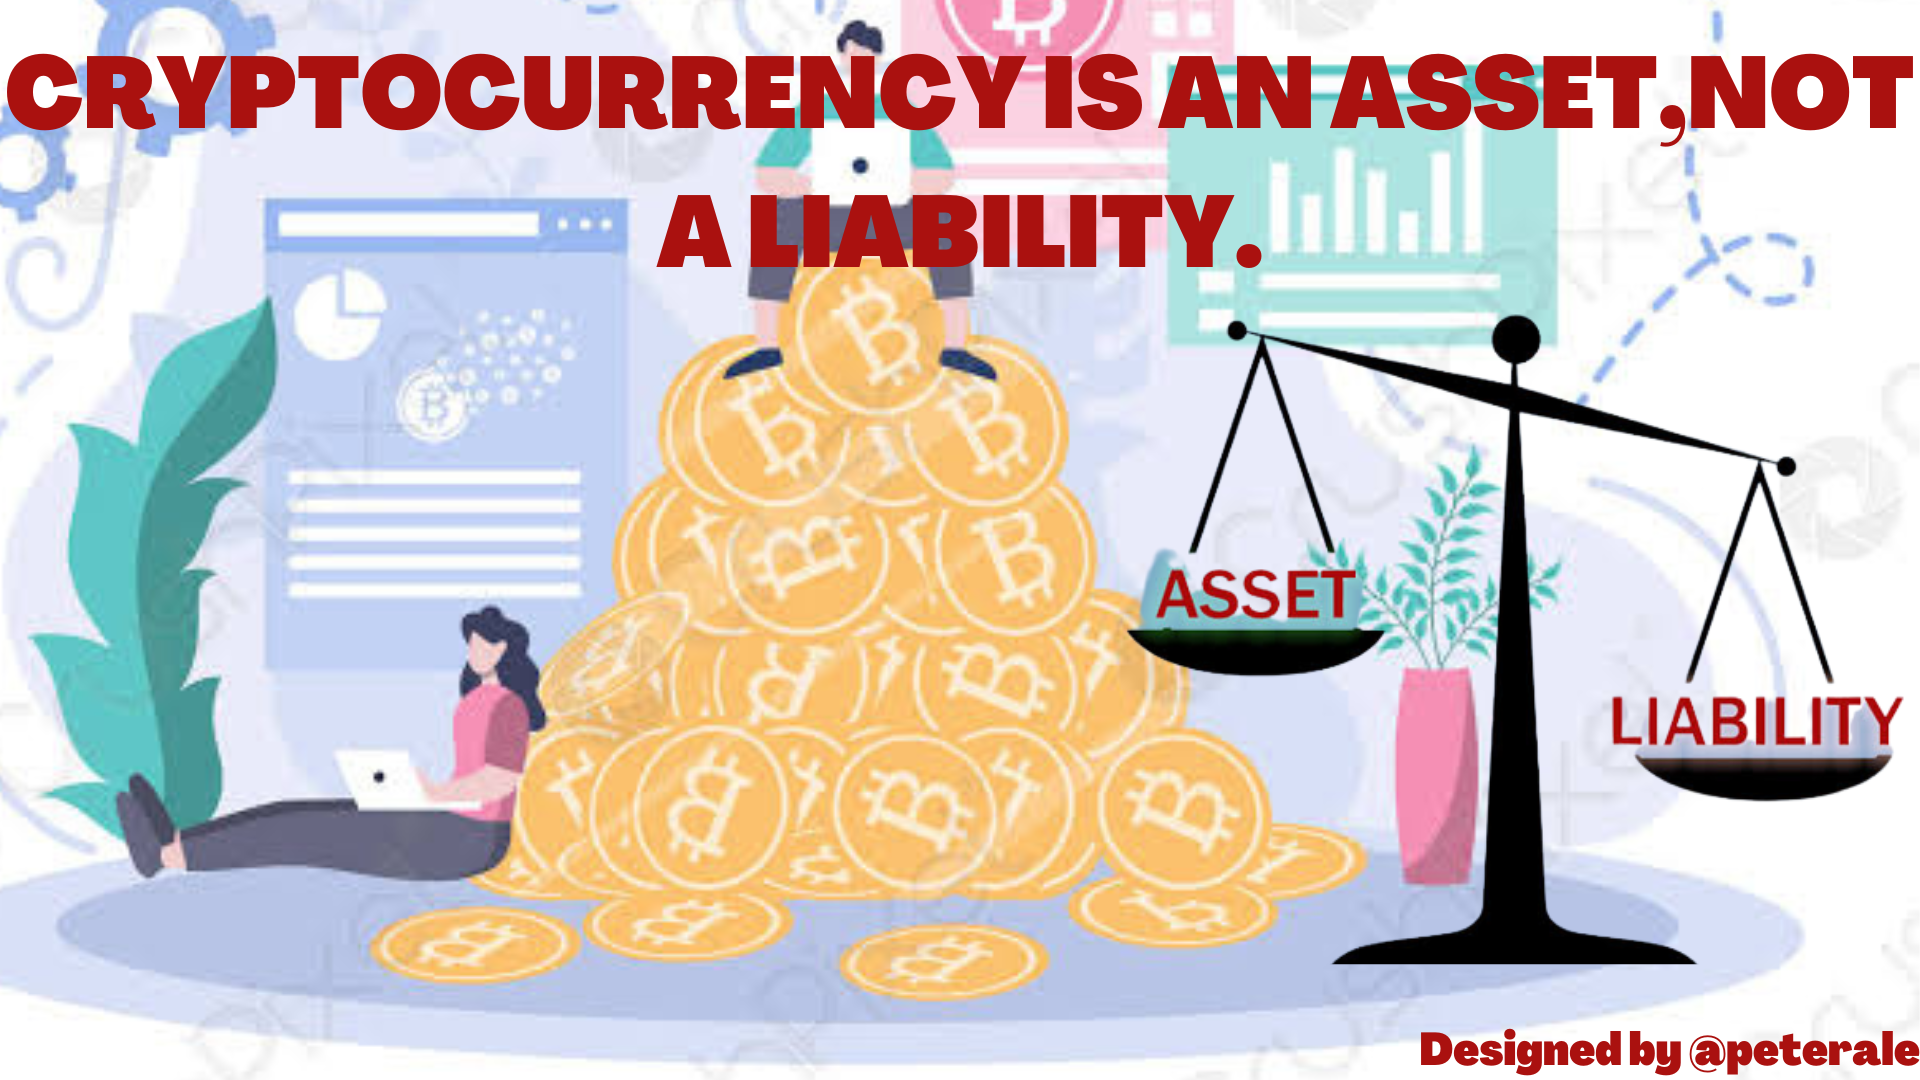 @peterale/cryptocurrency-is-an-asset-not-a-liability